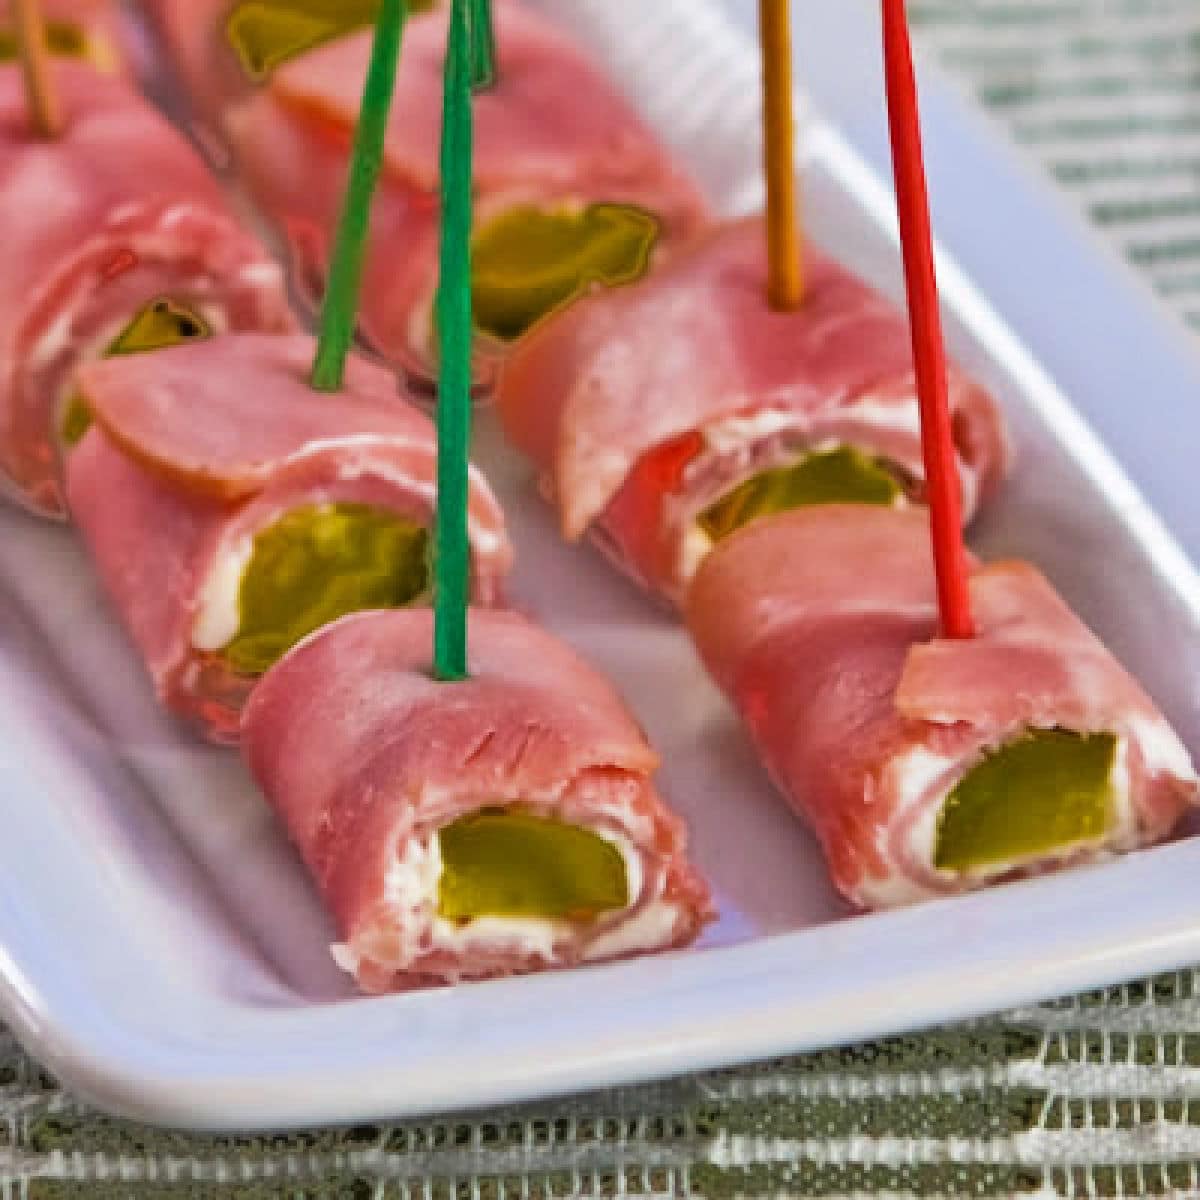 Large square image of ham and pickle roll ups shown on serving plate.